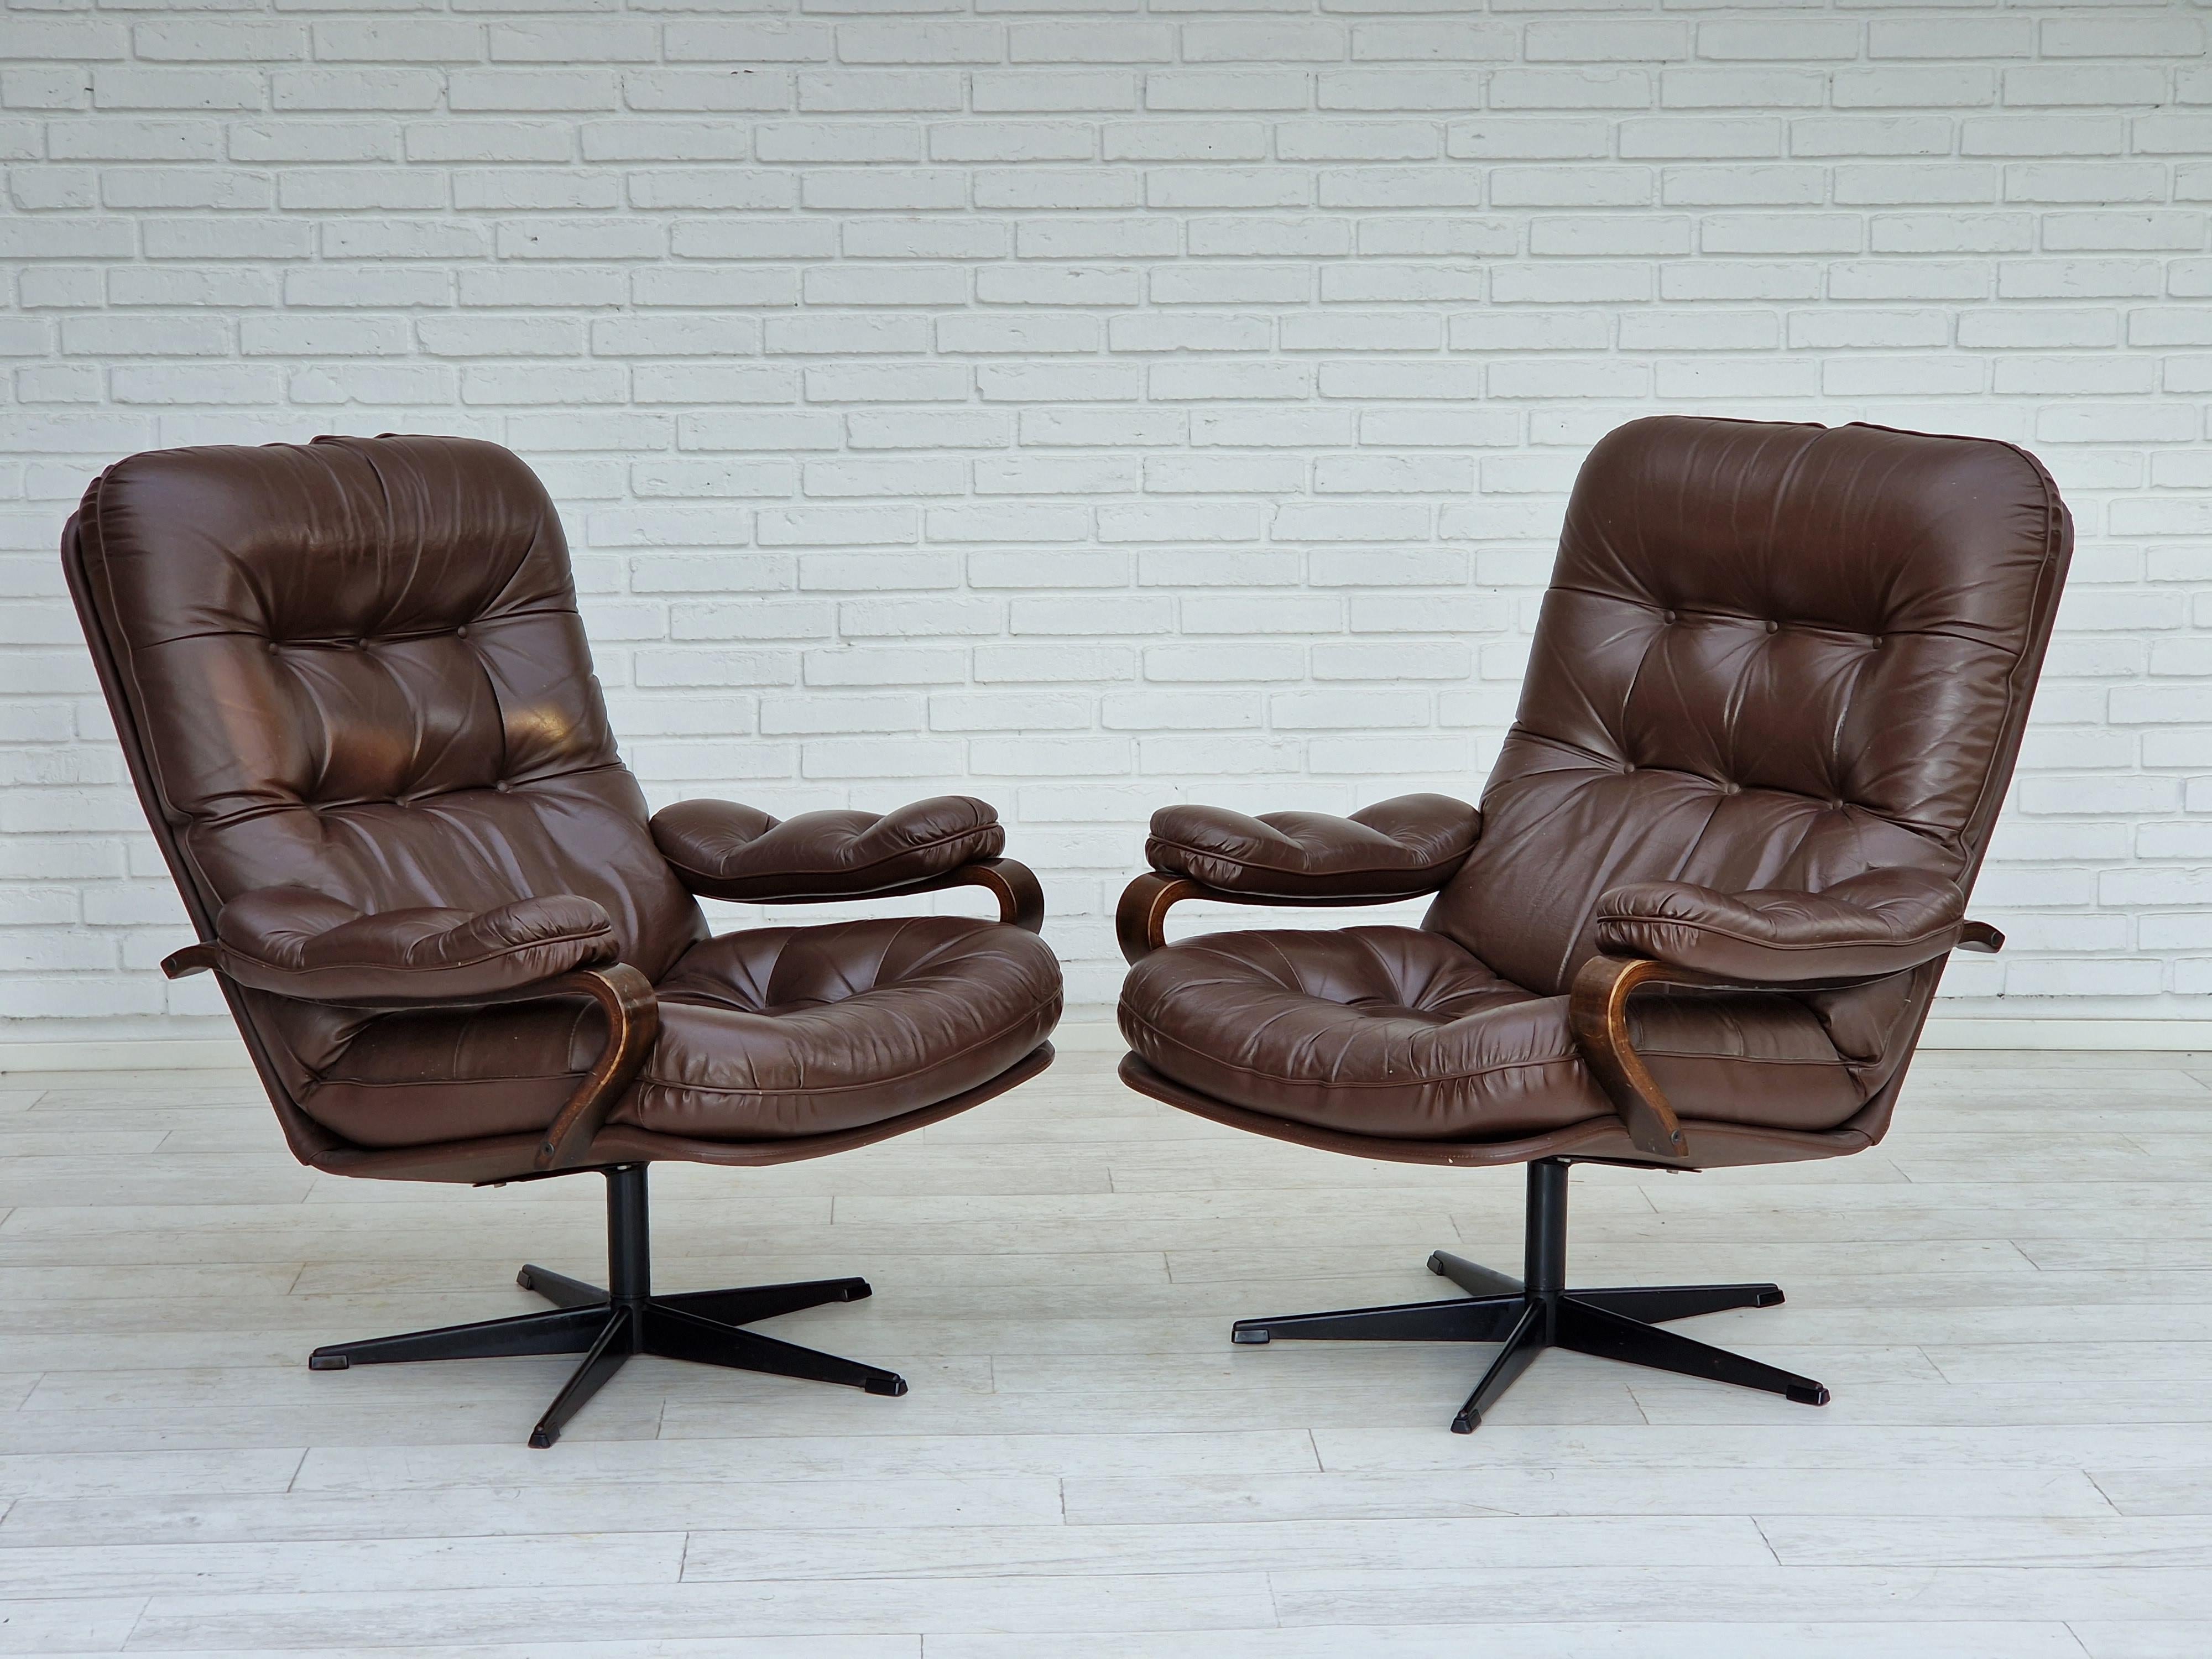 1970s, Danish design. Pair of swivel chairs in brown leather. Good condition: no smells and no stains. Foot of steel.